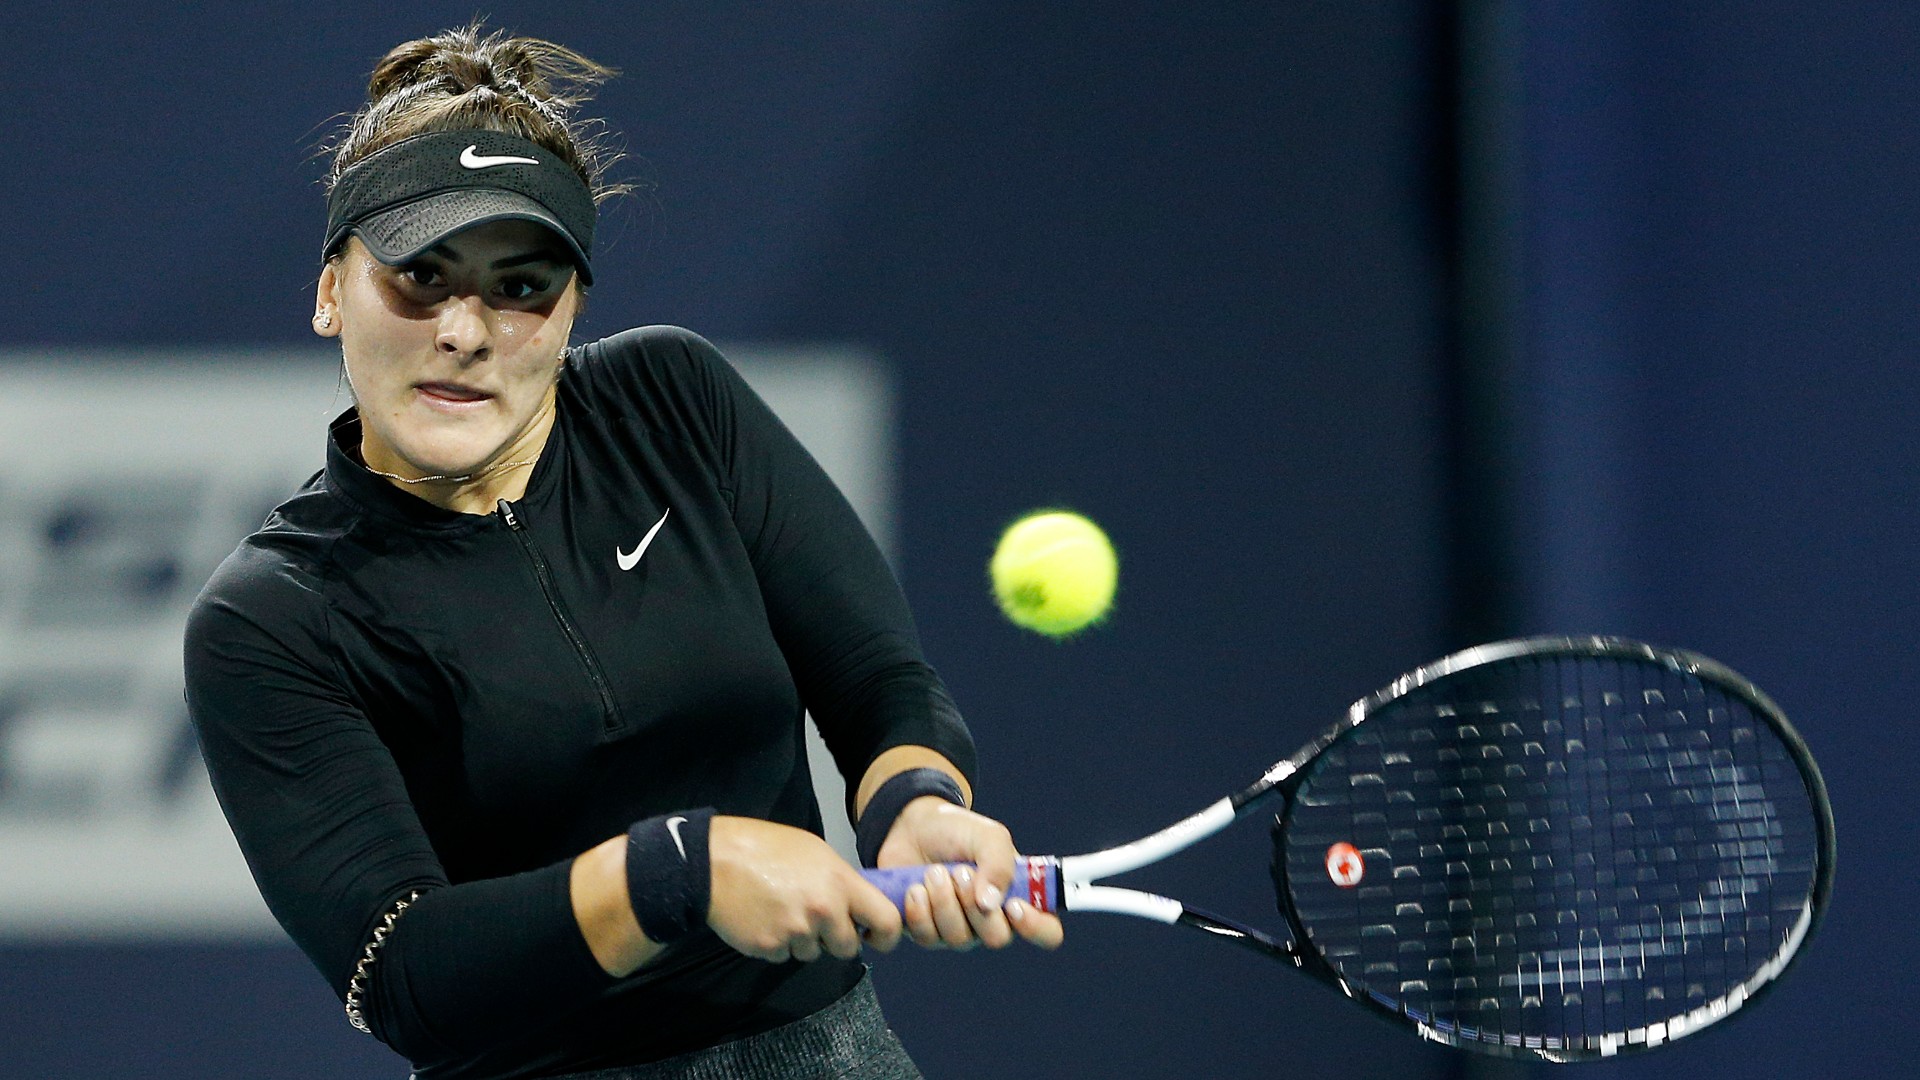 Rogers Cup 2019: Canadian Bianca Andreescu planning return in Toronto | Sporting News ...1920 x 1080